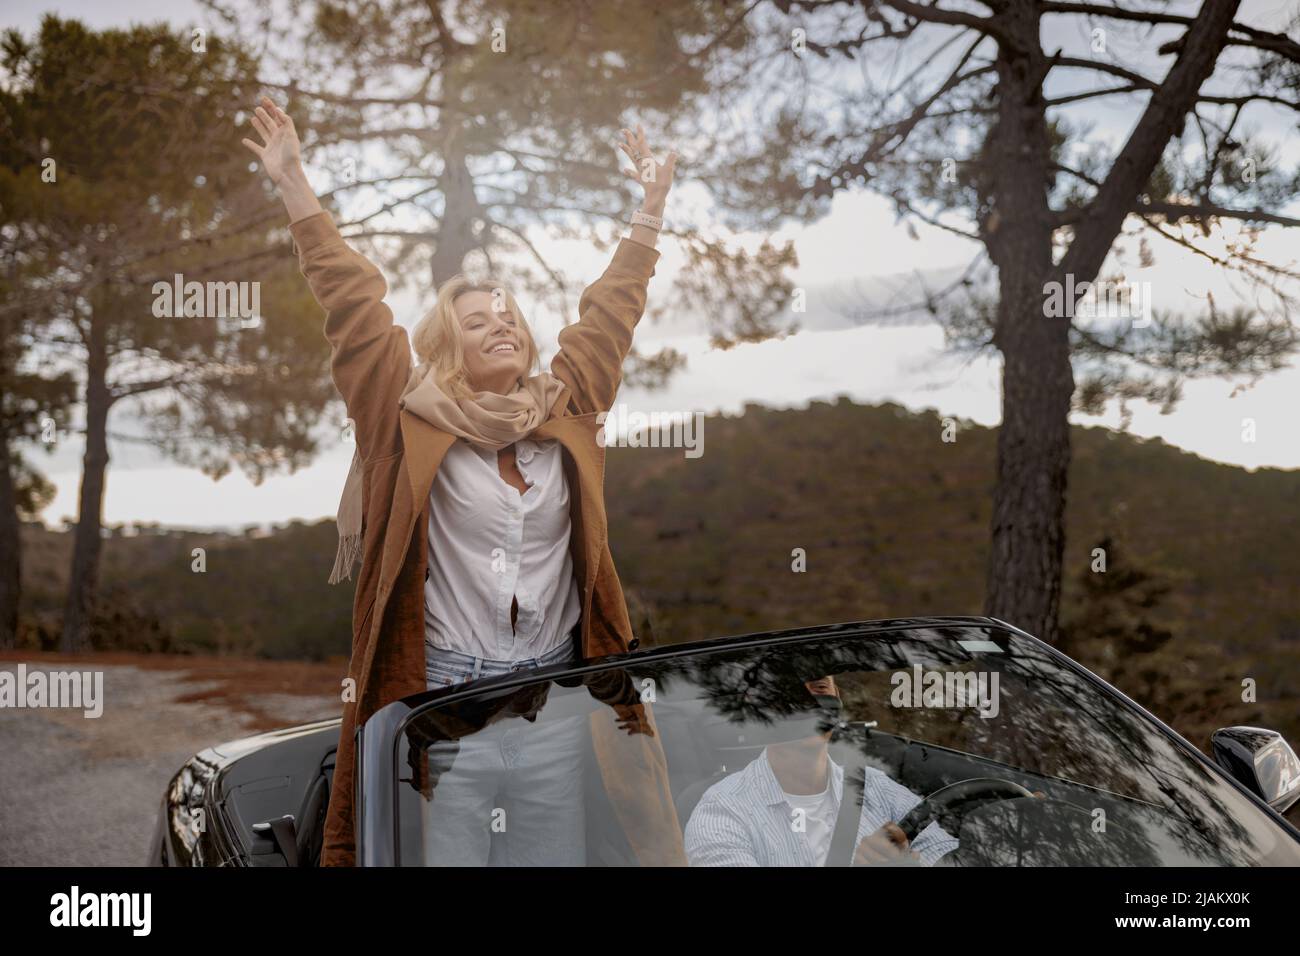 Pretty young smiled woman stands on front seat in convertible car with her hands raised up Stock Photo